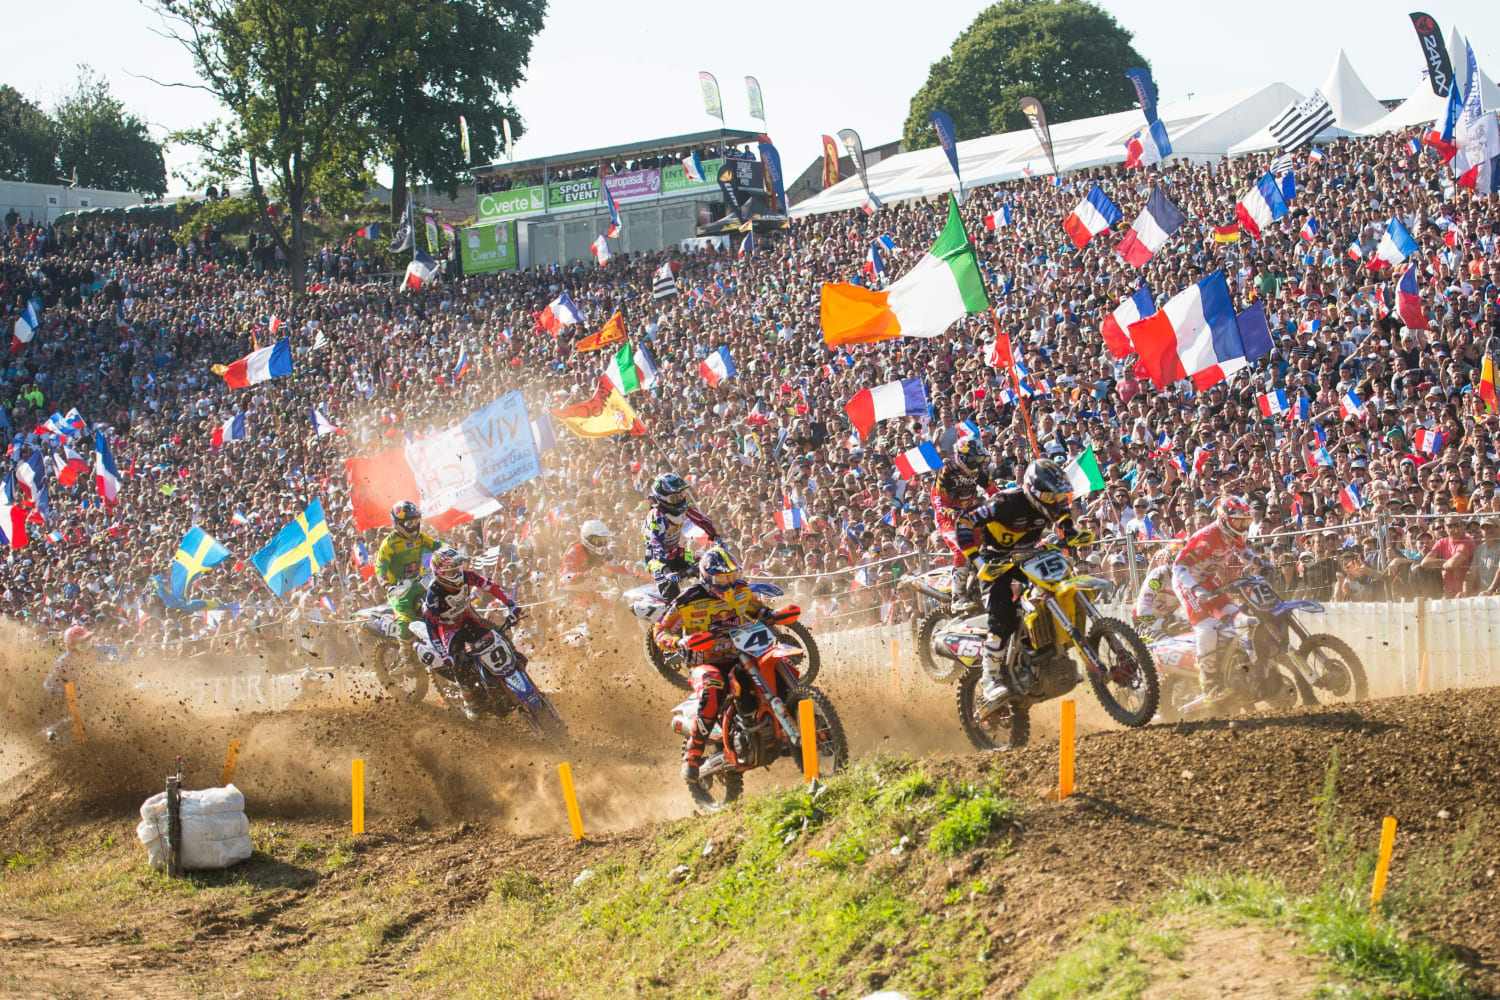 Greatest Ever Team Motocross of Nations Expert Opinion